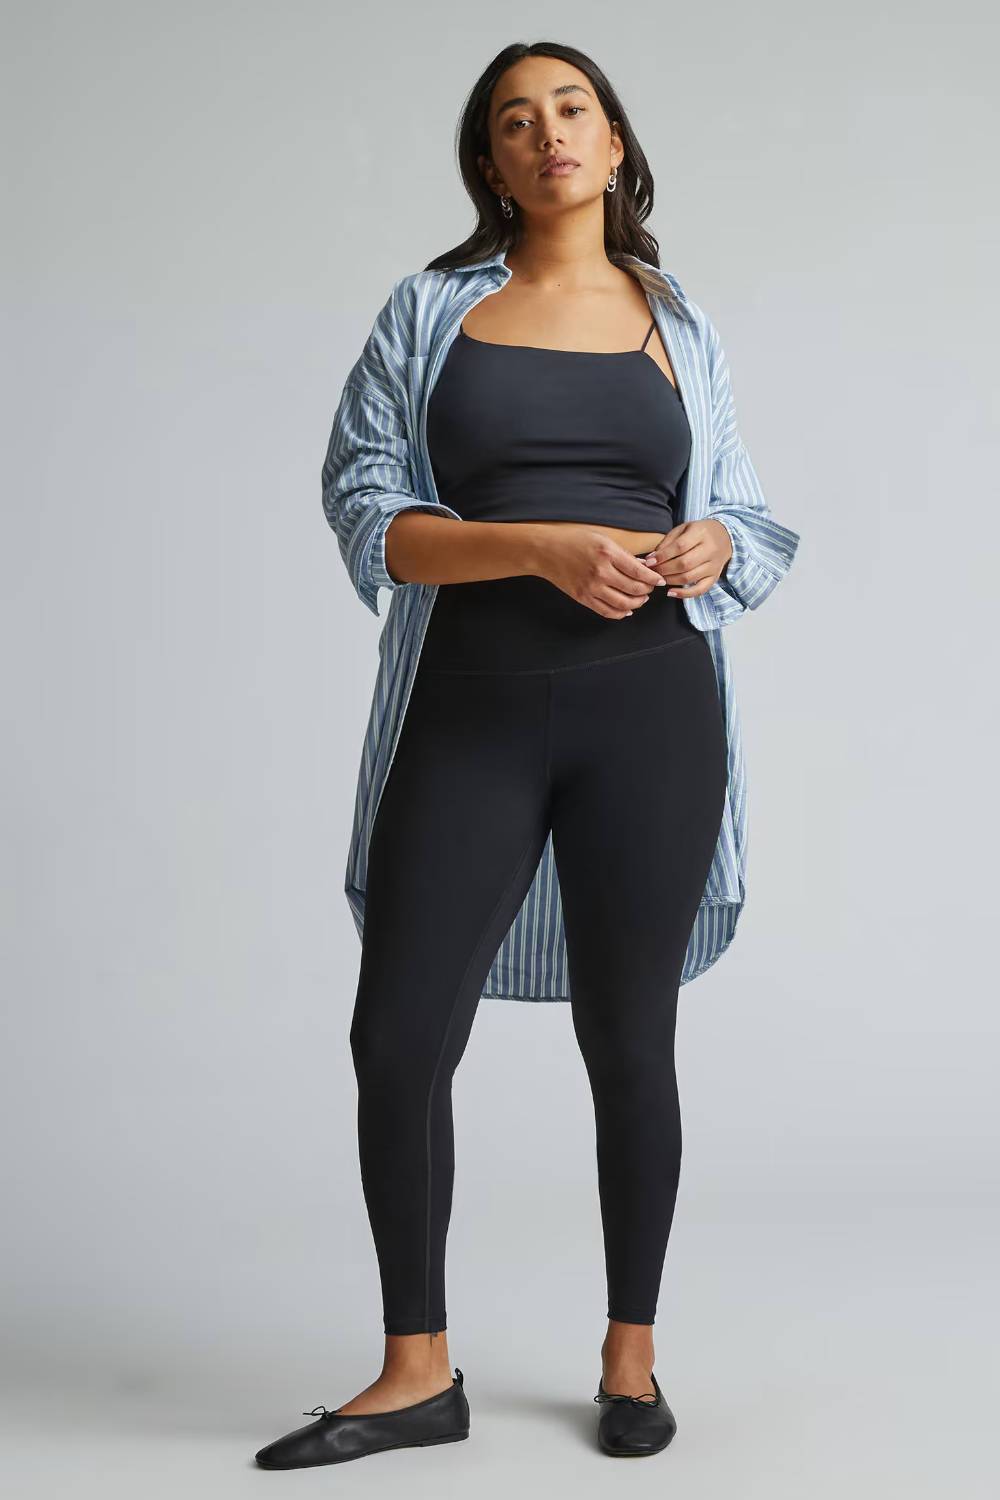 everlane recycled activewear brand